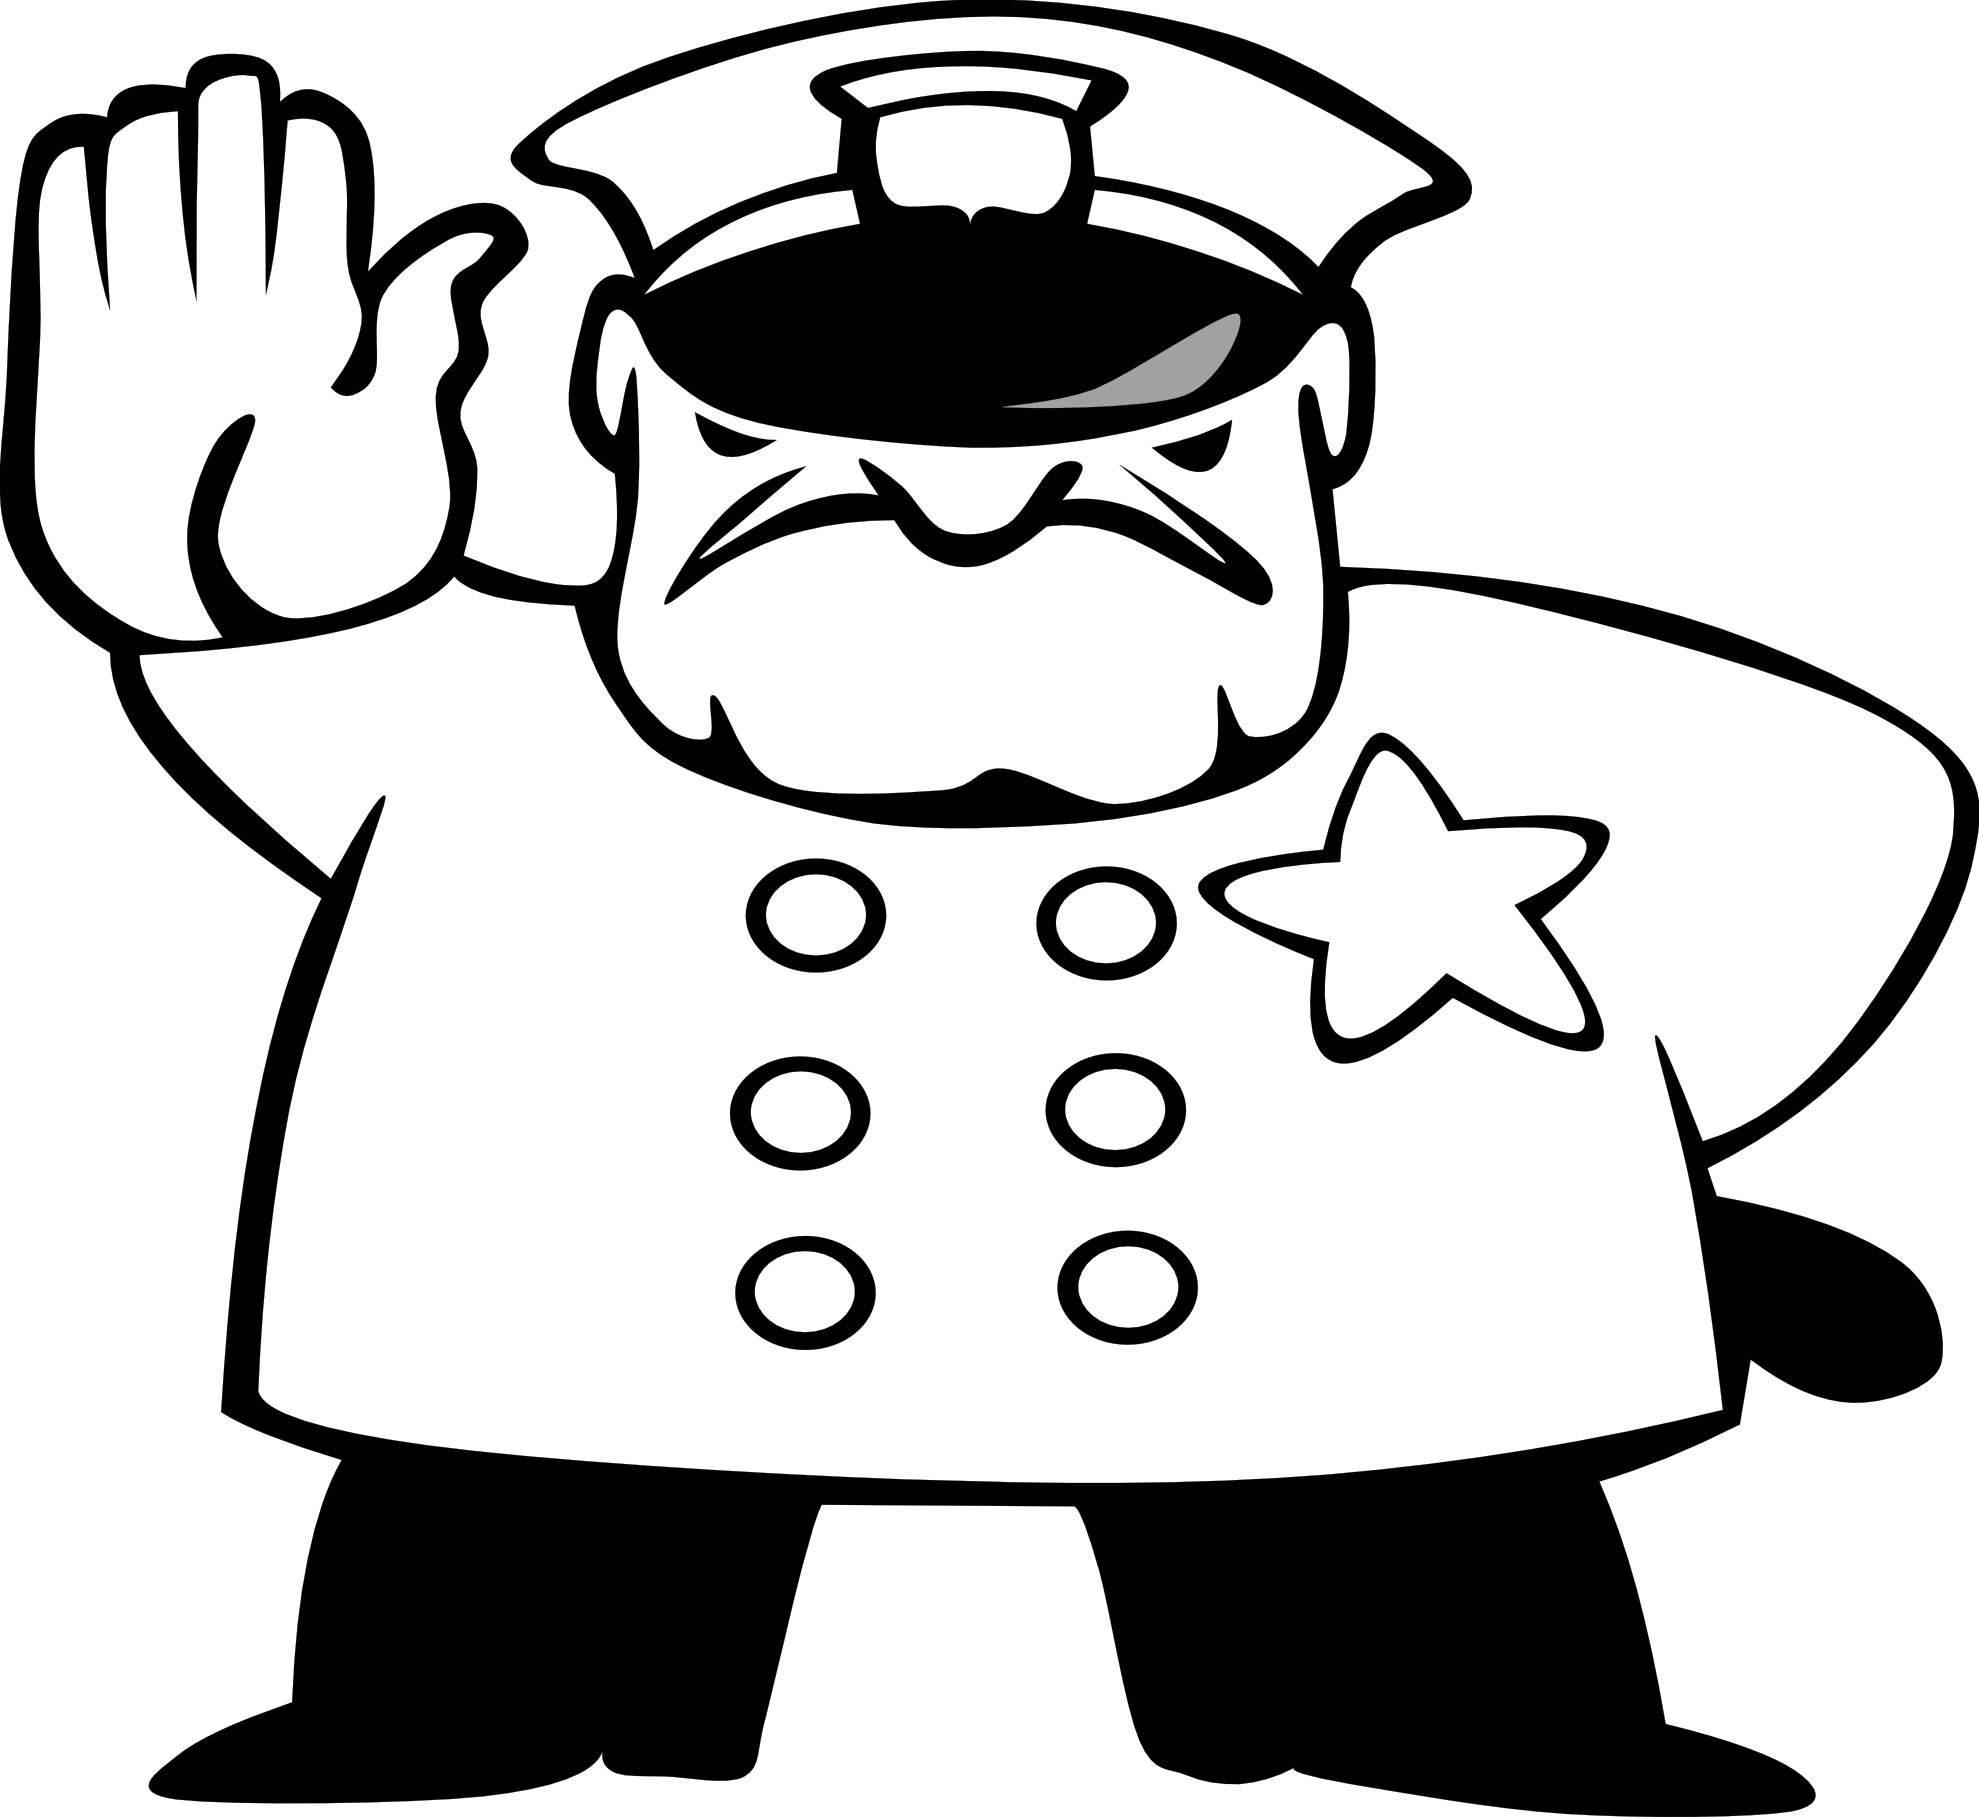 Police man drawing clipart